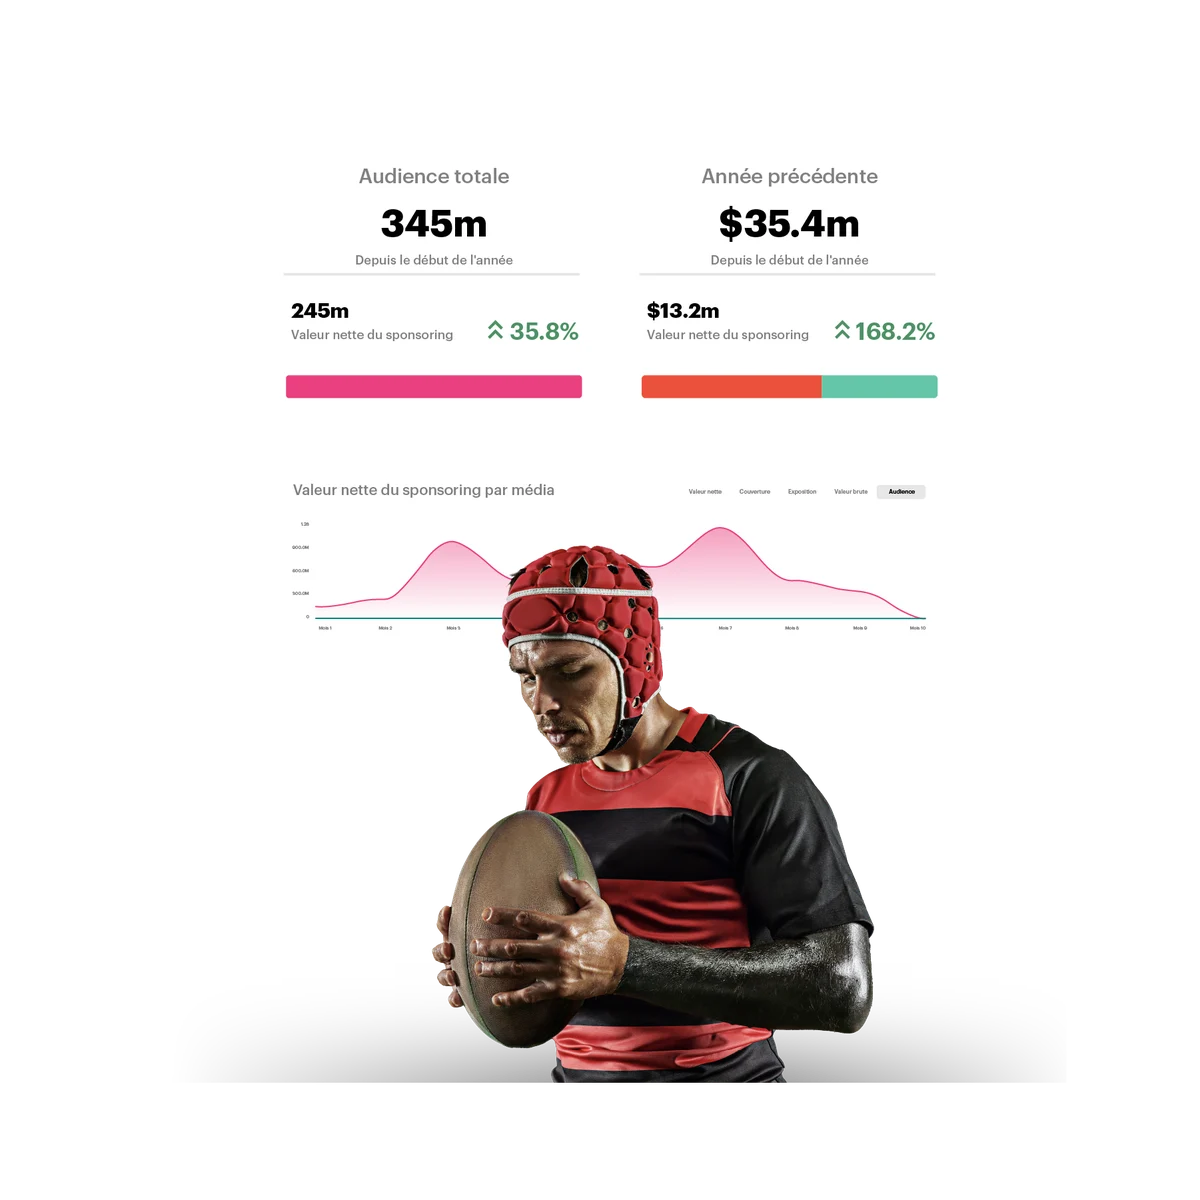 rugby player with sports data in the background